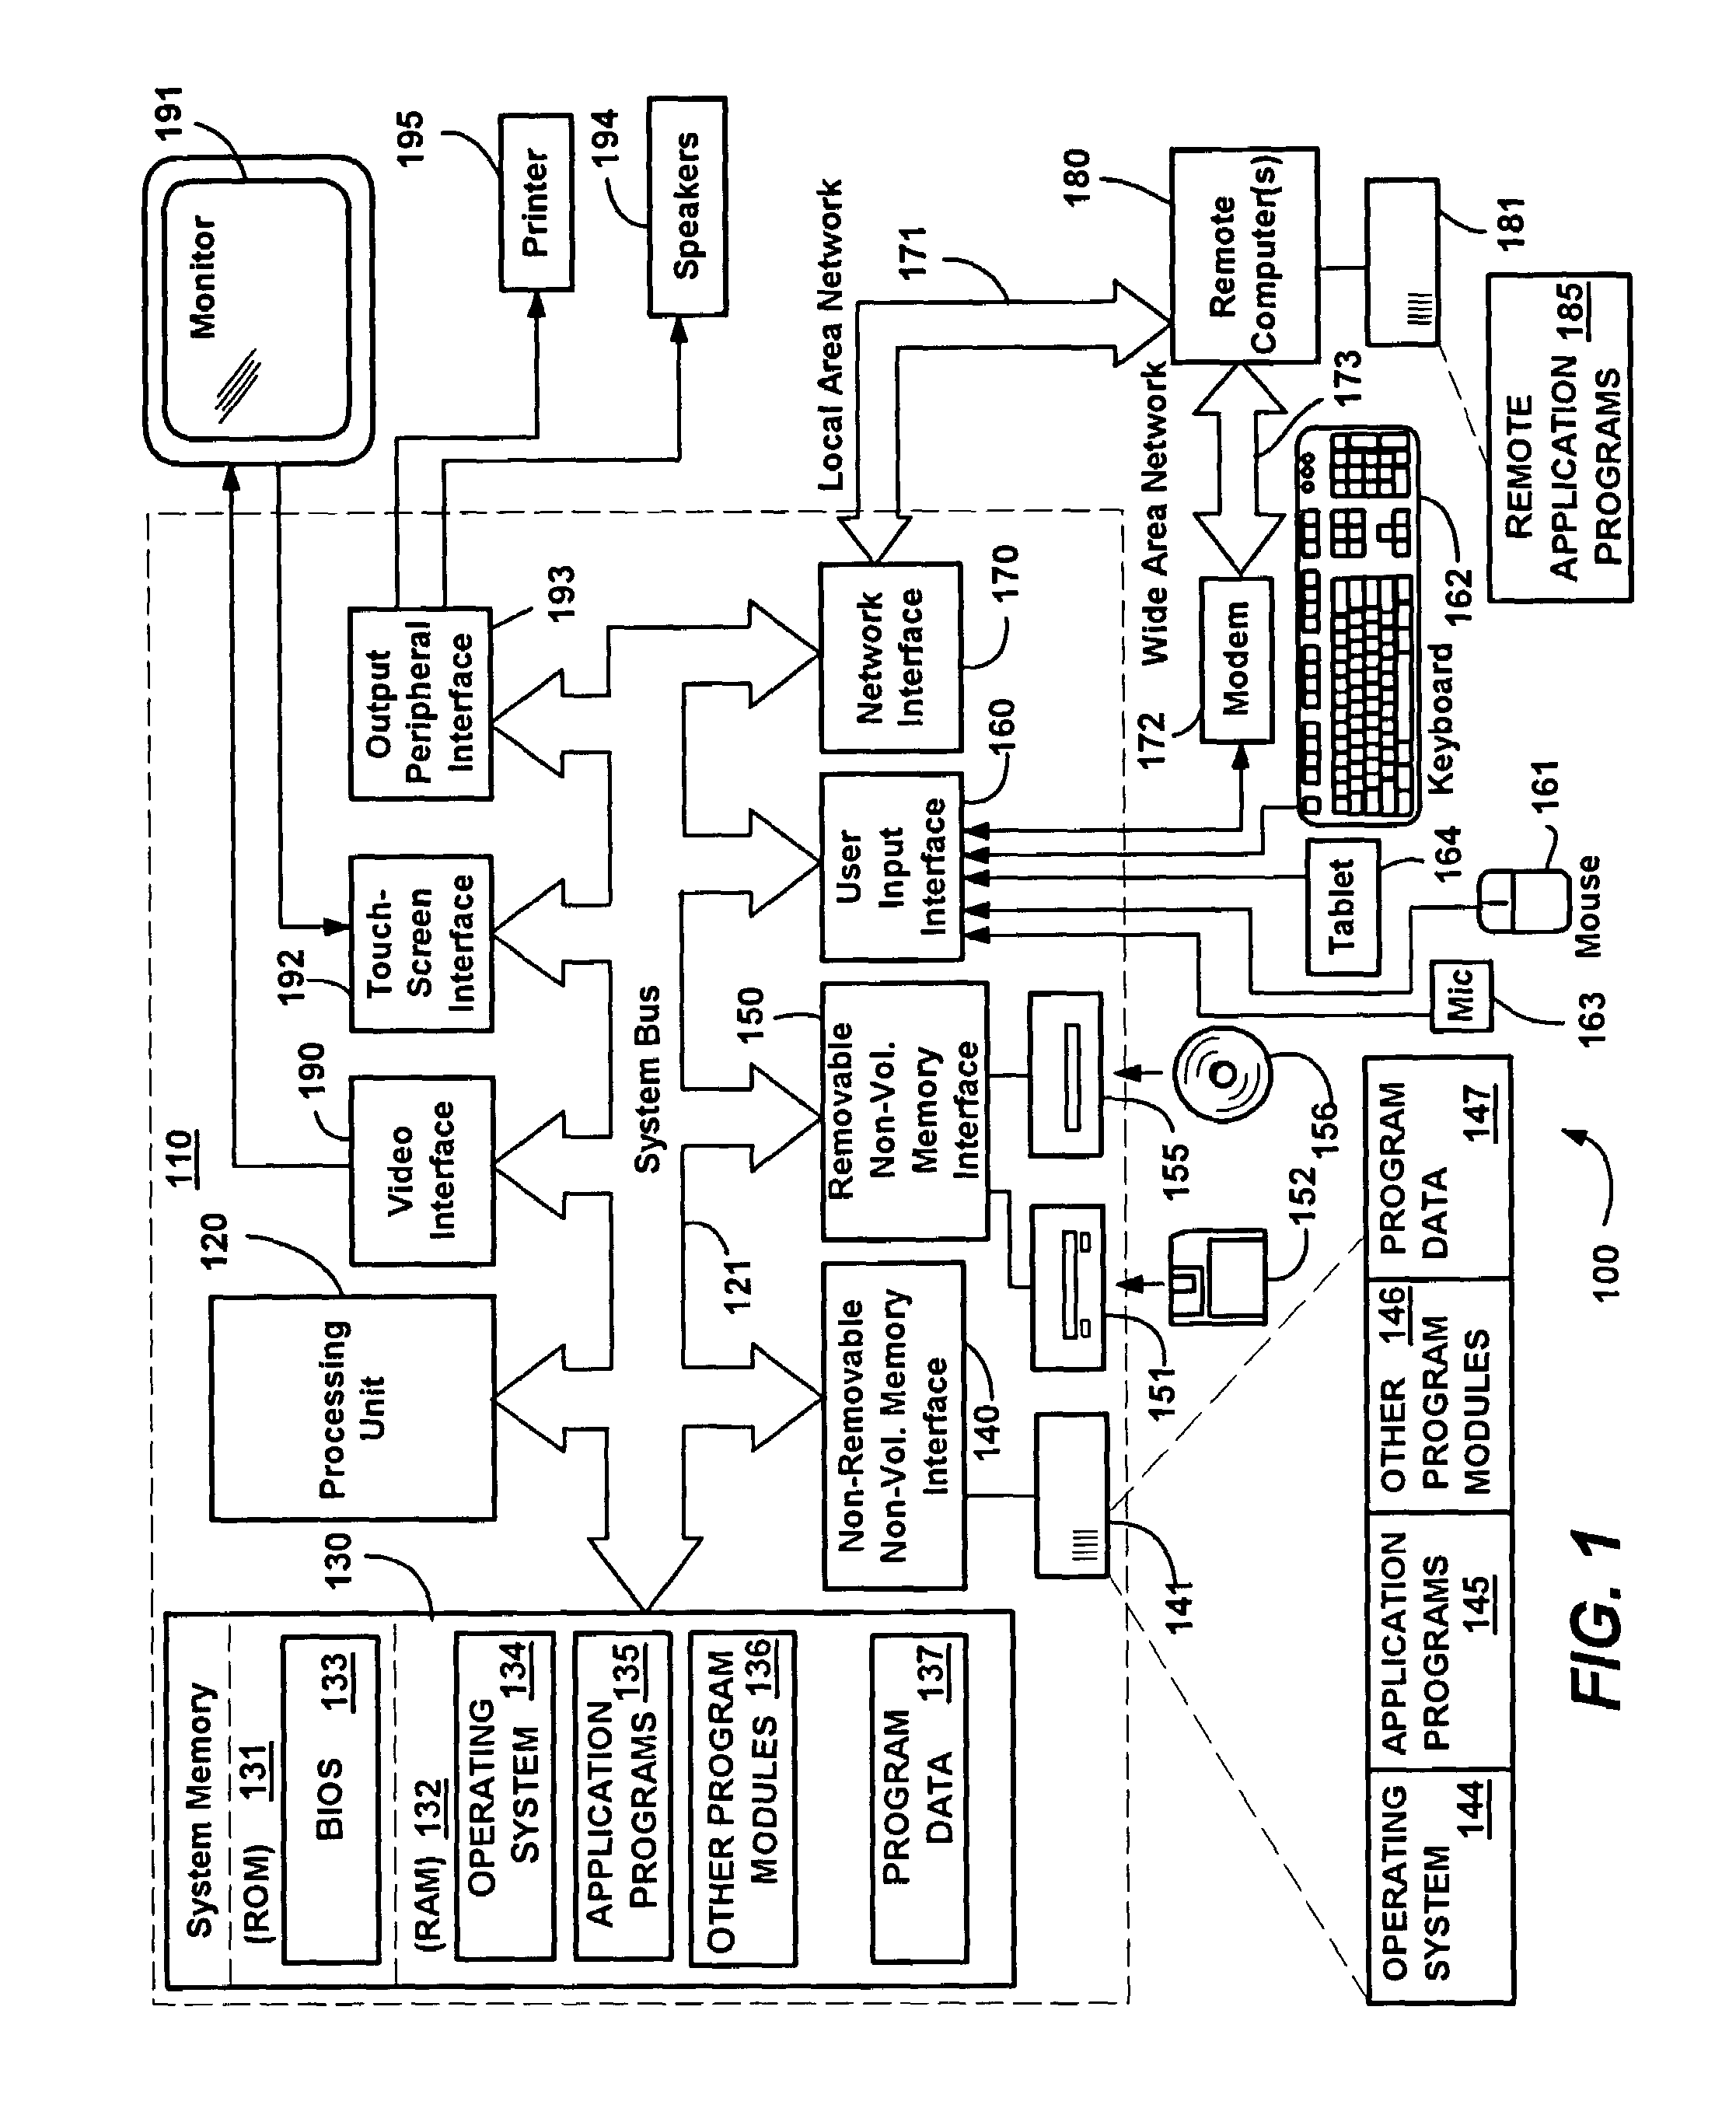 Method and system for automatically testing a software build